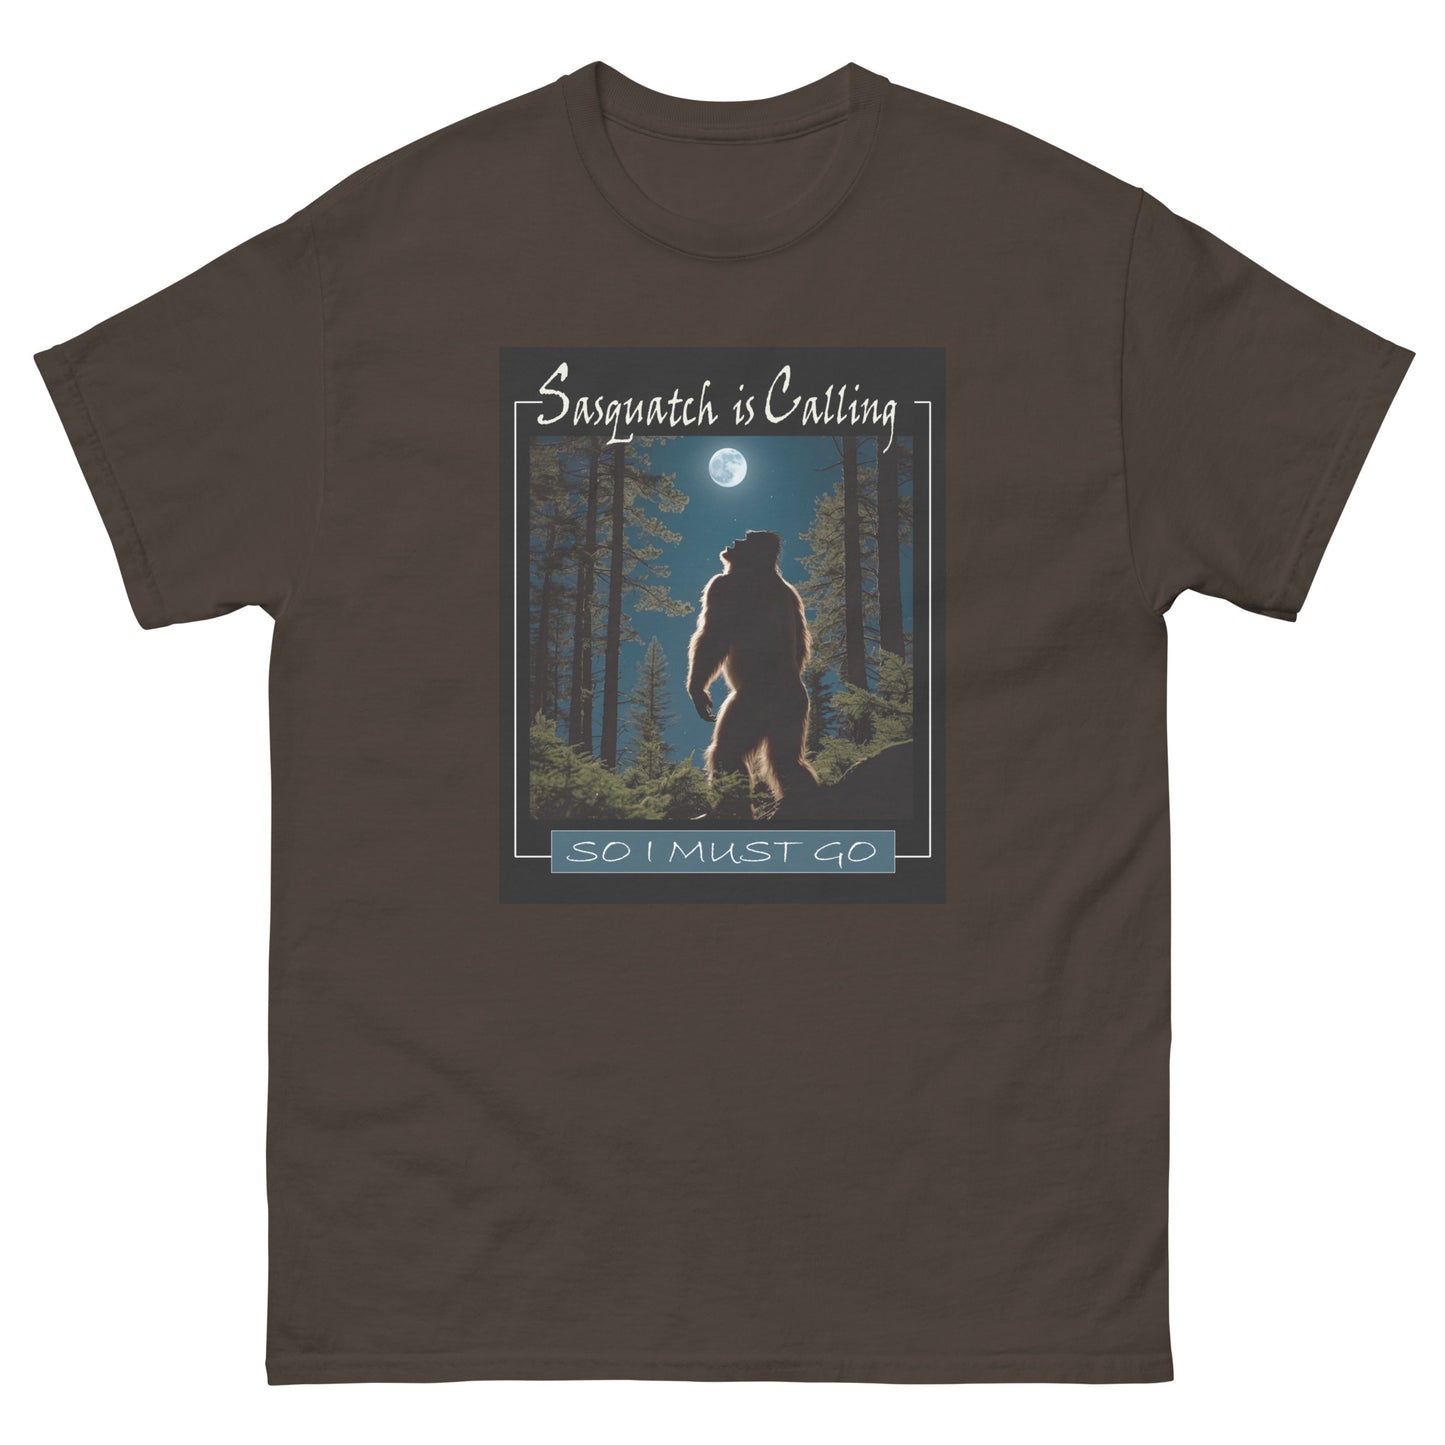 Sasquatch Is Calling...So I Must Go! Classic tee in Multiple sizes and Colors!